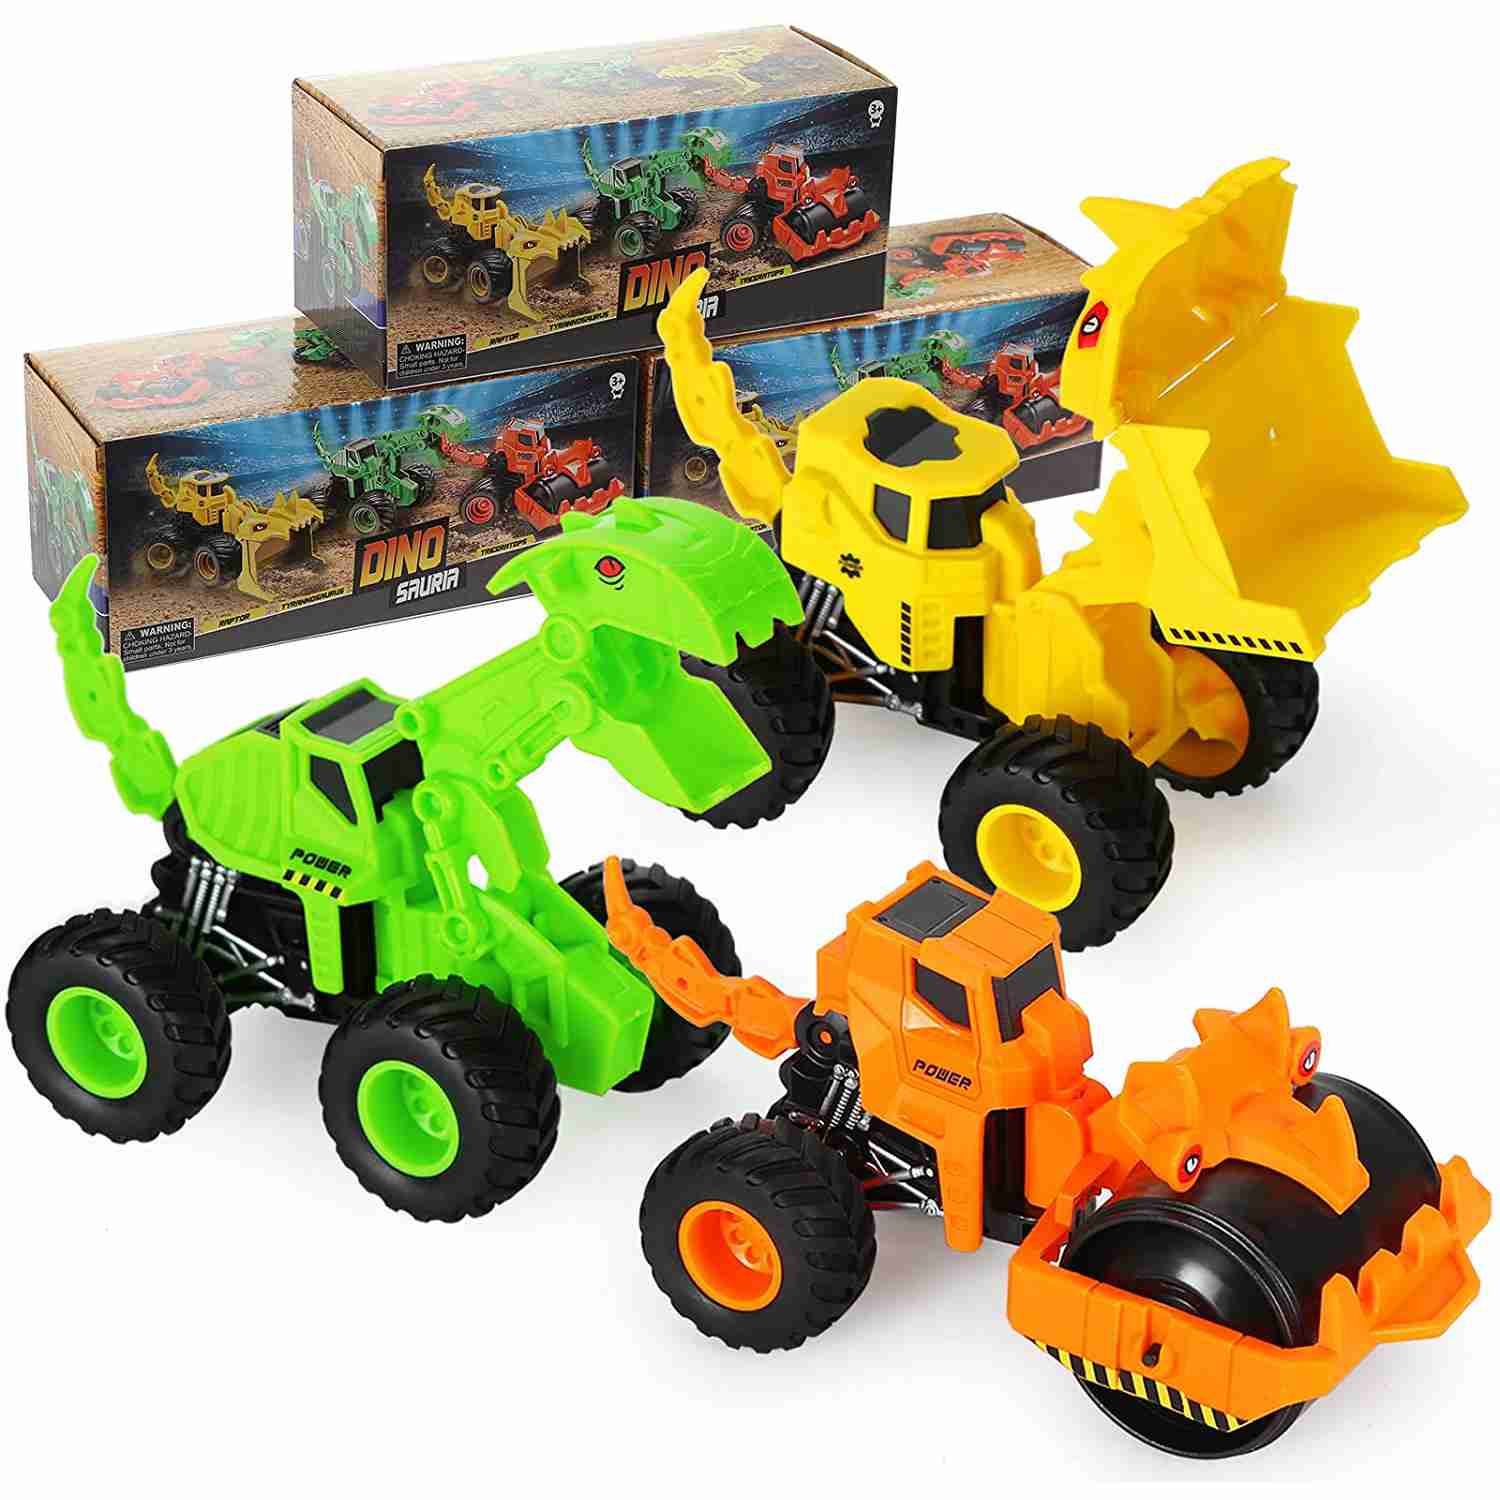 3PCS Dinosaur Toys for Kids Dinosaur Engineering Vehicle Construction Vehicle Playsets Birthday Gift for Boys Girls Toddlers 3 otters Dinosaur Toys Cars 